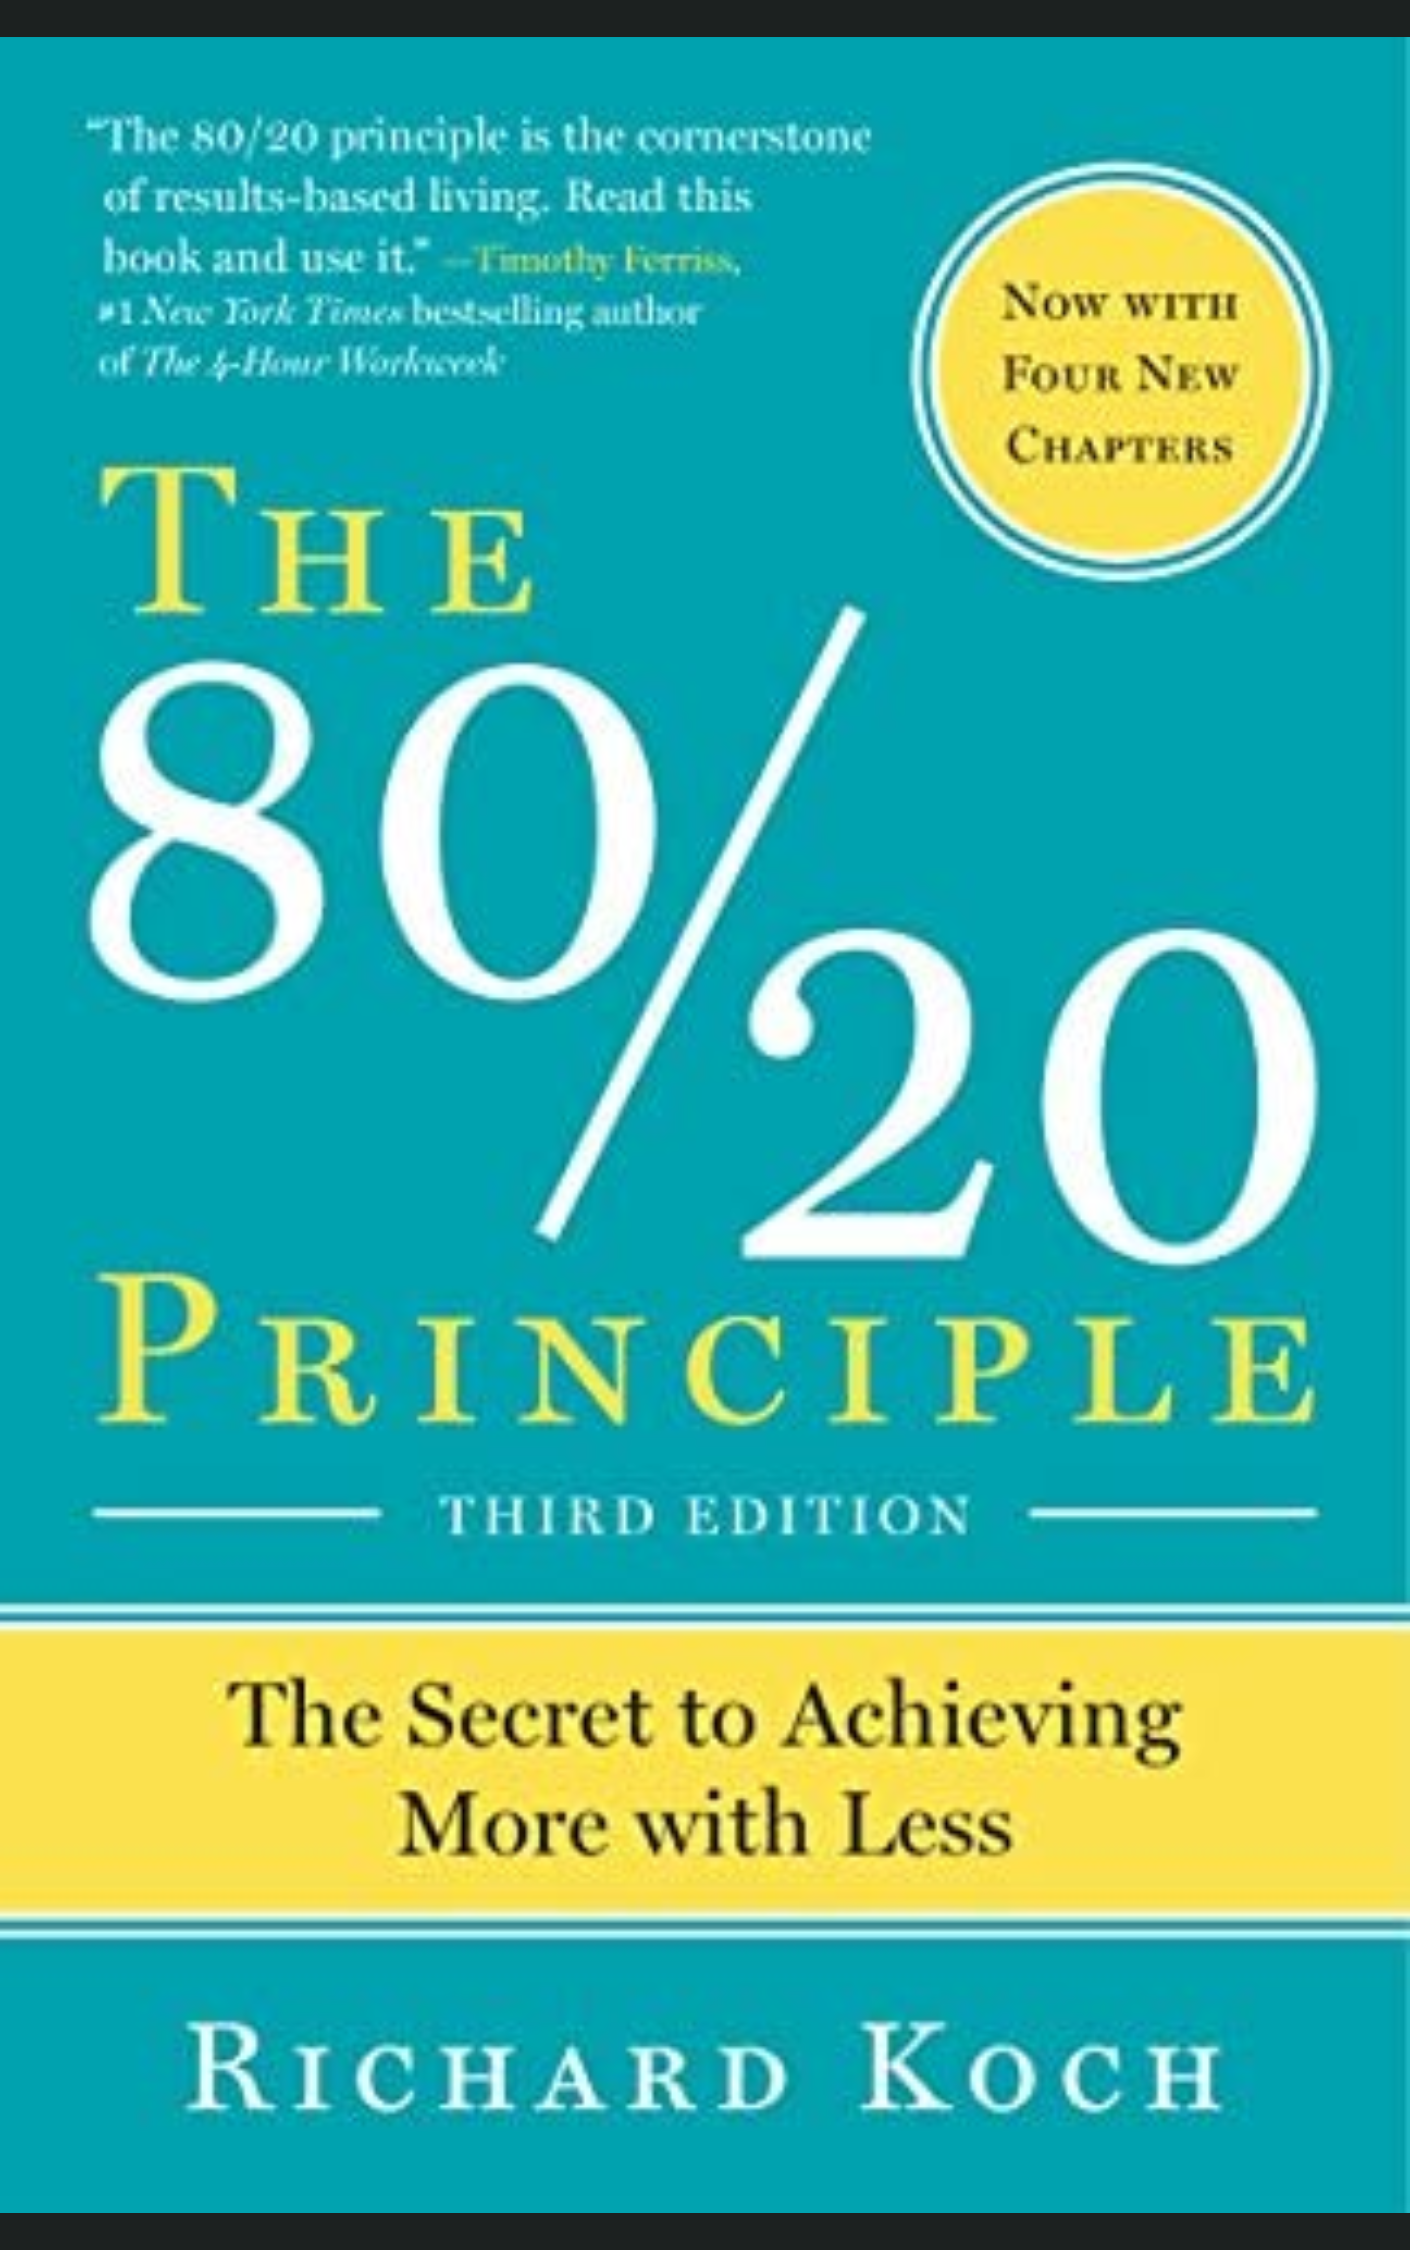 The 80/20 Principle: The Secret to Achieving More with Less  by Richard Koch